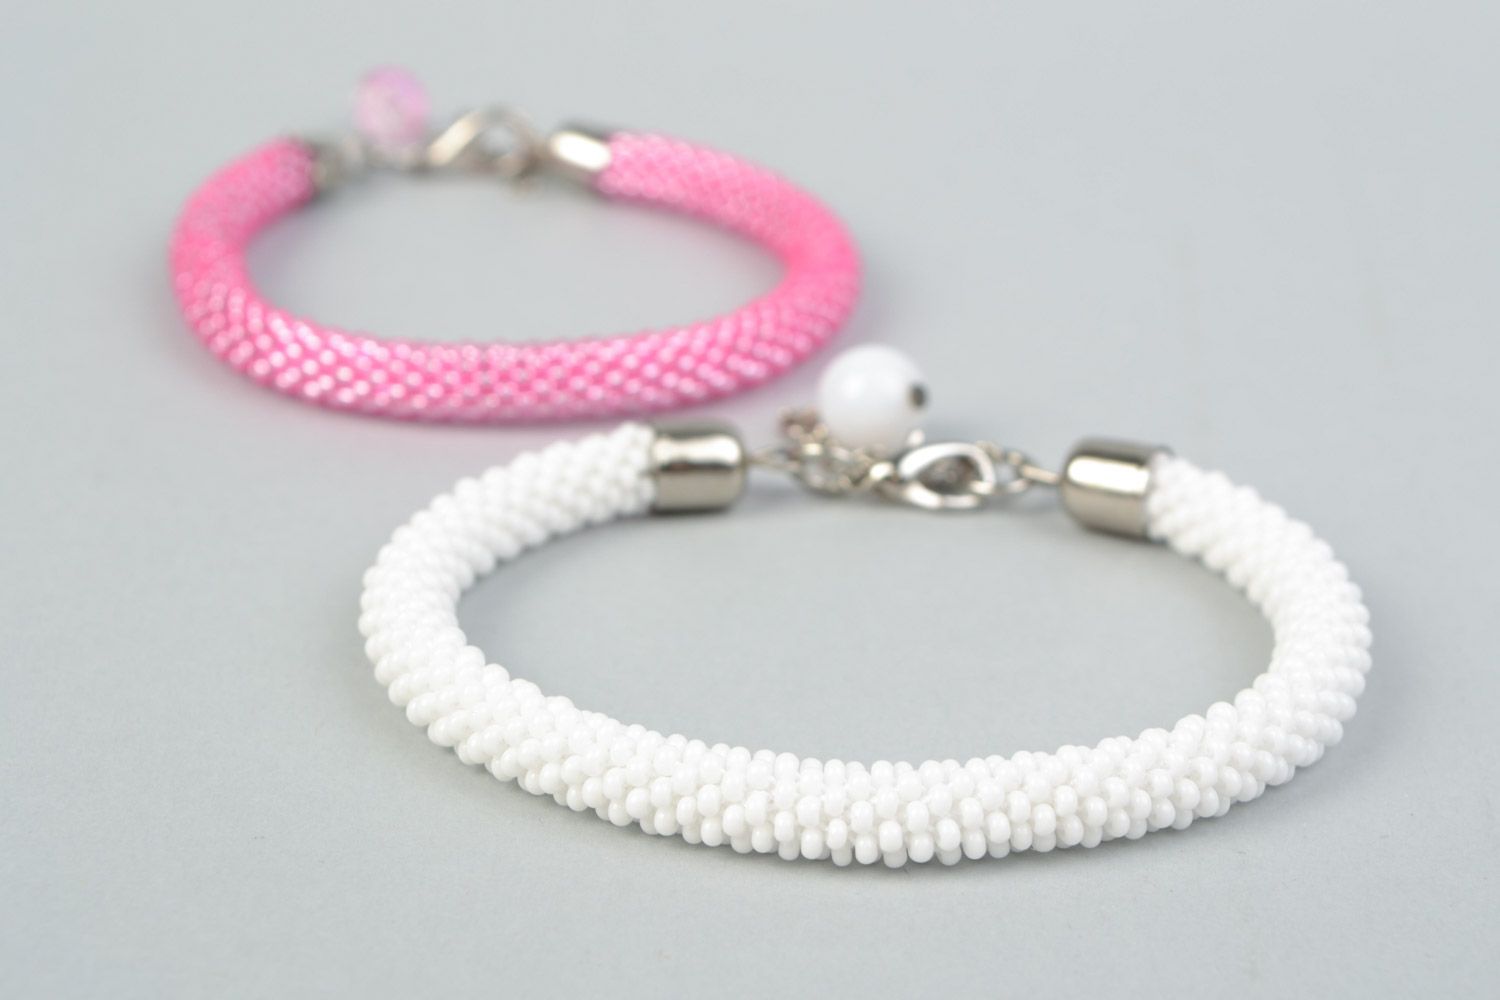 Set of 2 handmade beaded cord women's wrist bracelets in pink and white colors photo 4